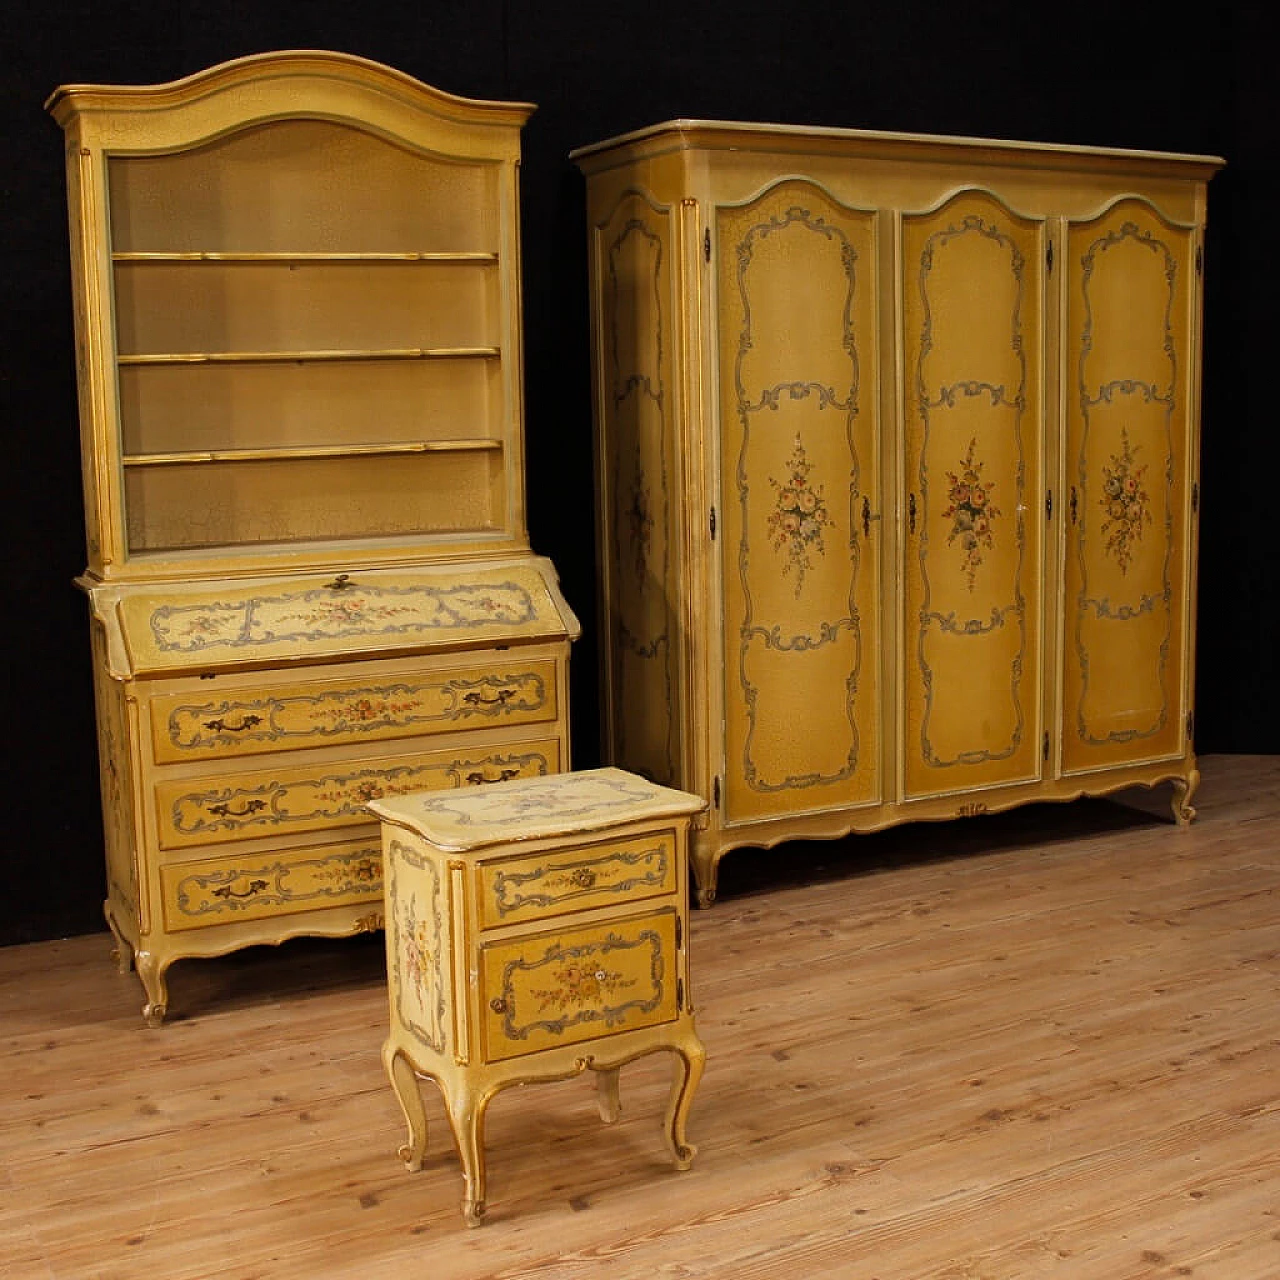 Venetian lacquered, gilded and painted wood trumeau 2